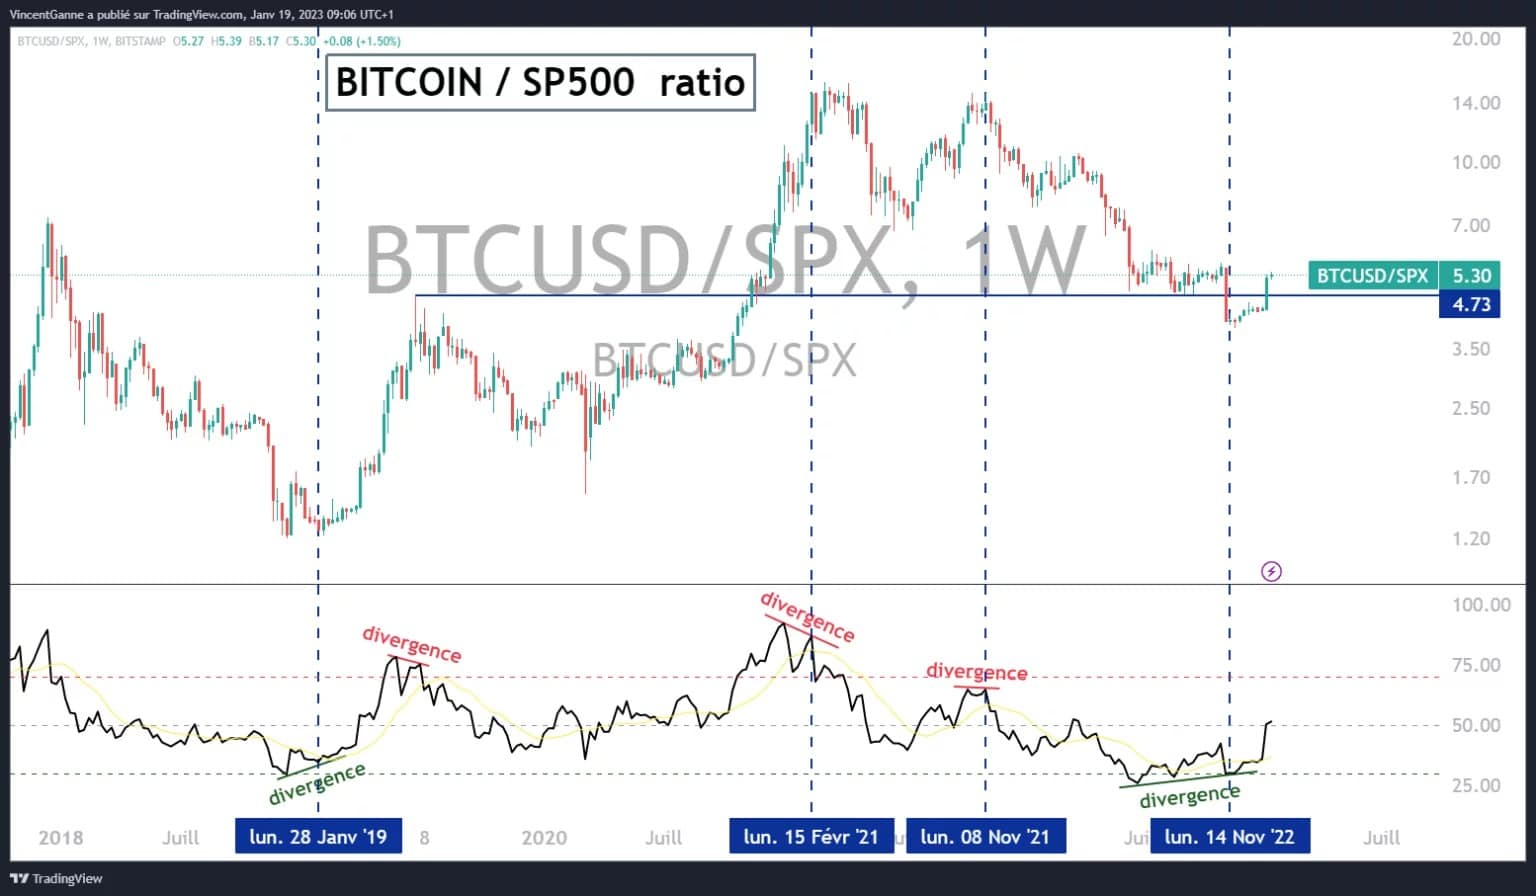 Chart that reveals the relative strength ratio between the US equity market and the bitcoin price (the US equity market being represented by the S&P 500 stock index)